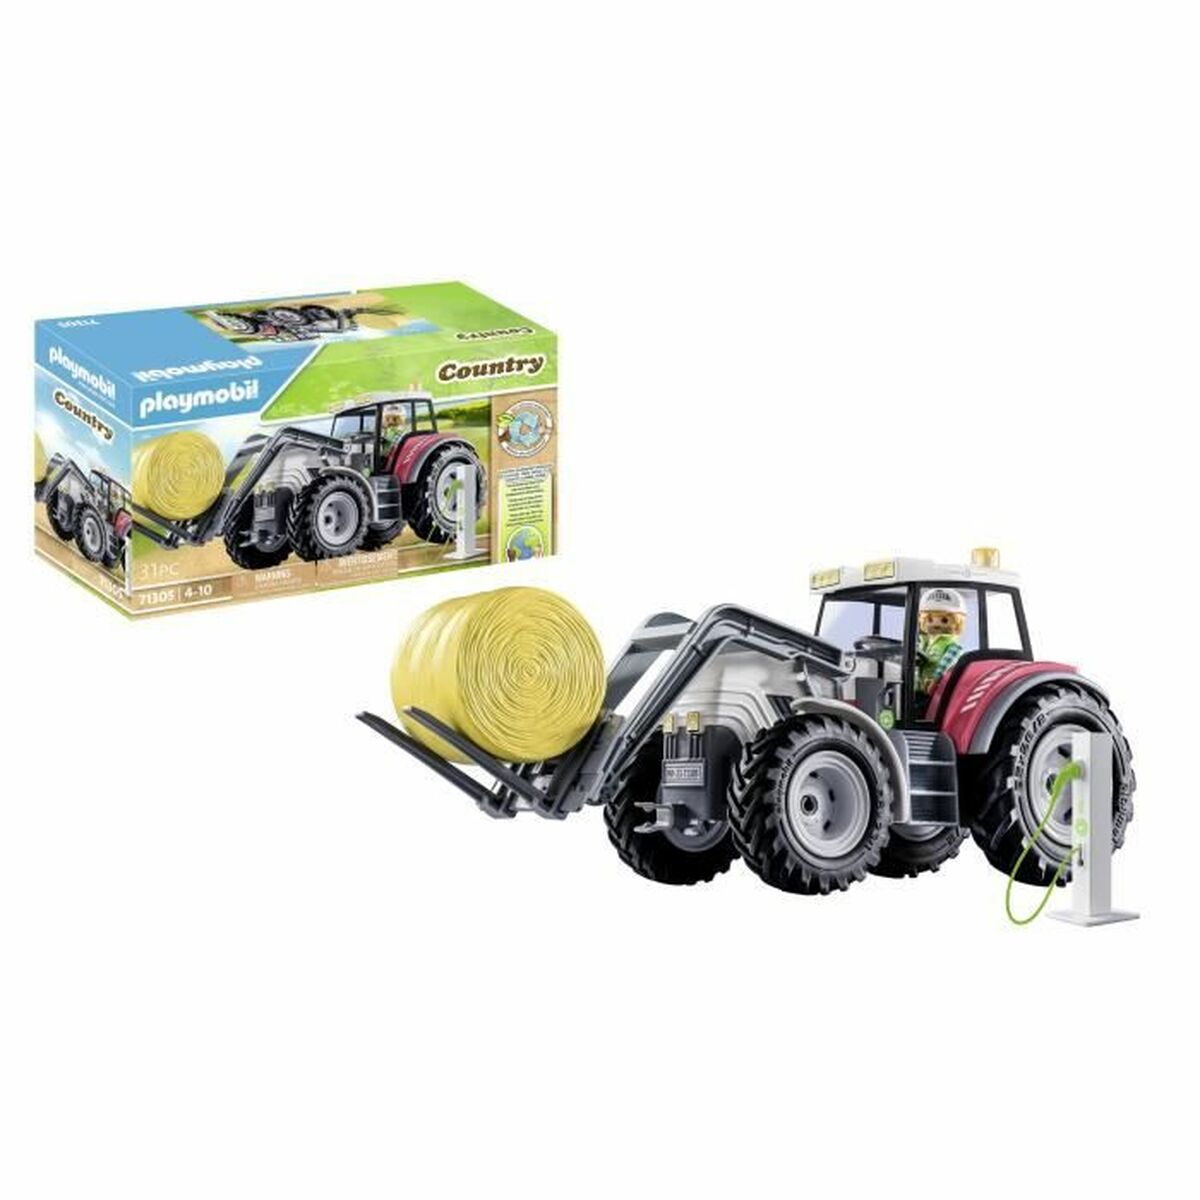 Playmobil Country Tractor